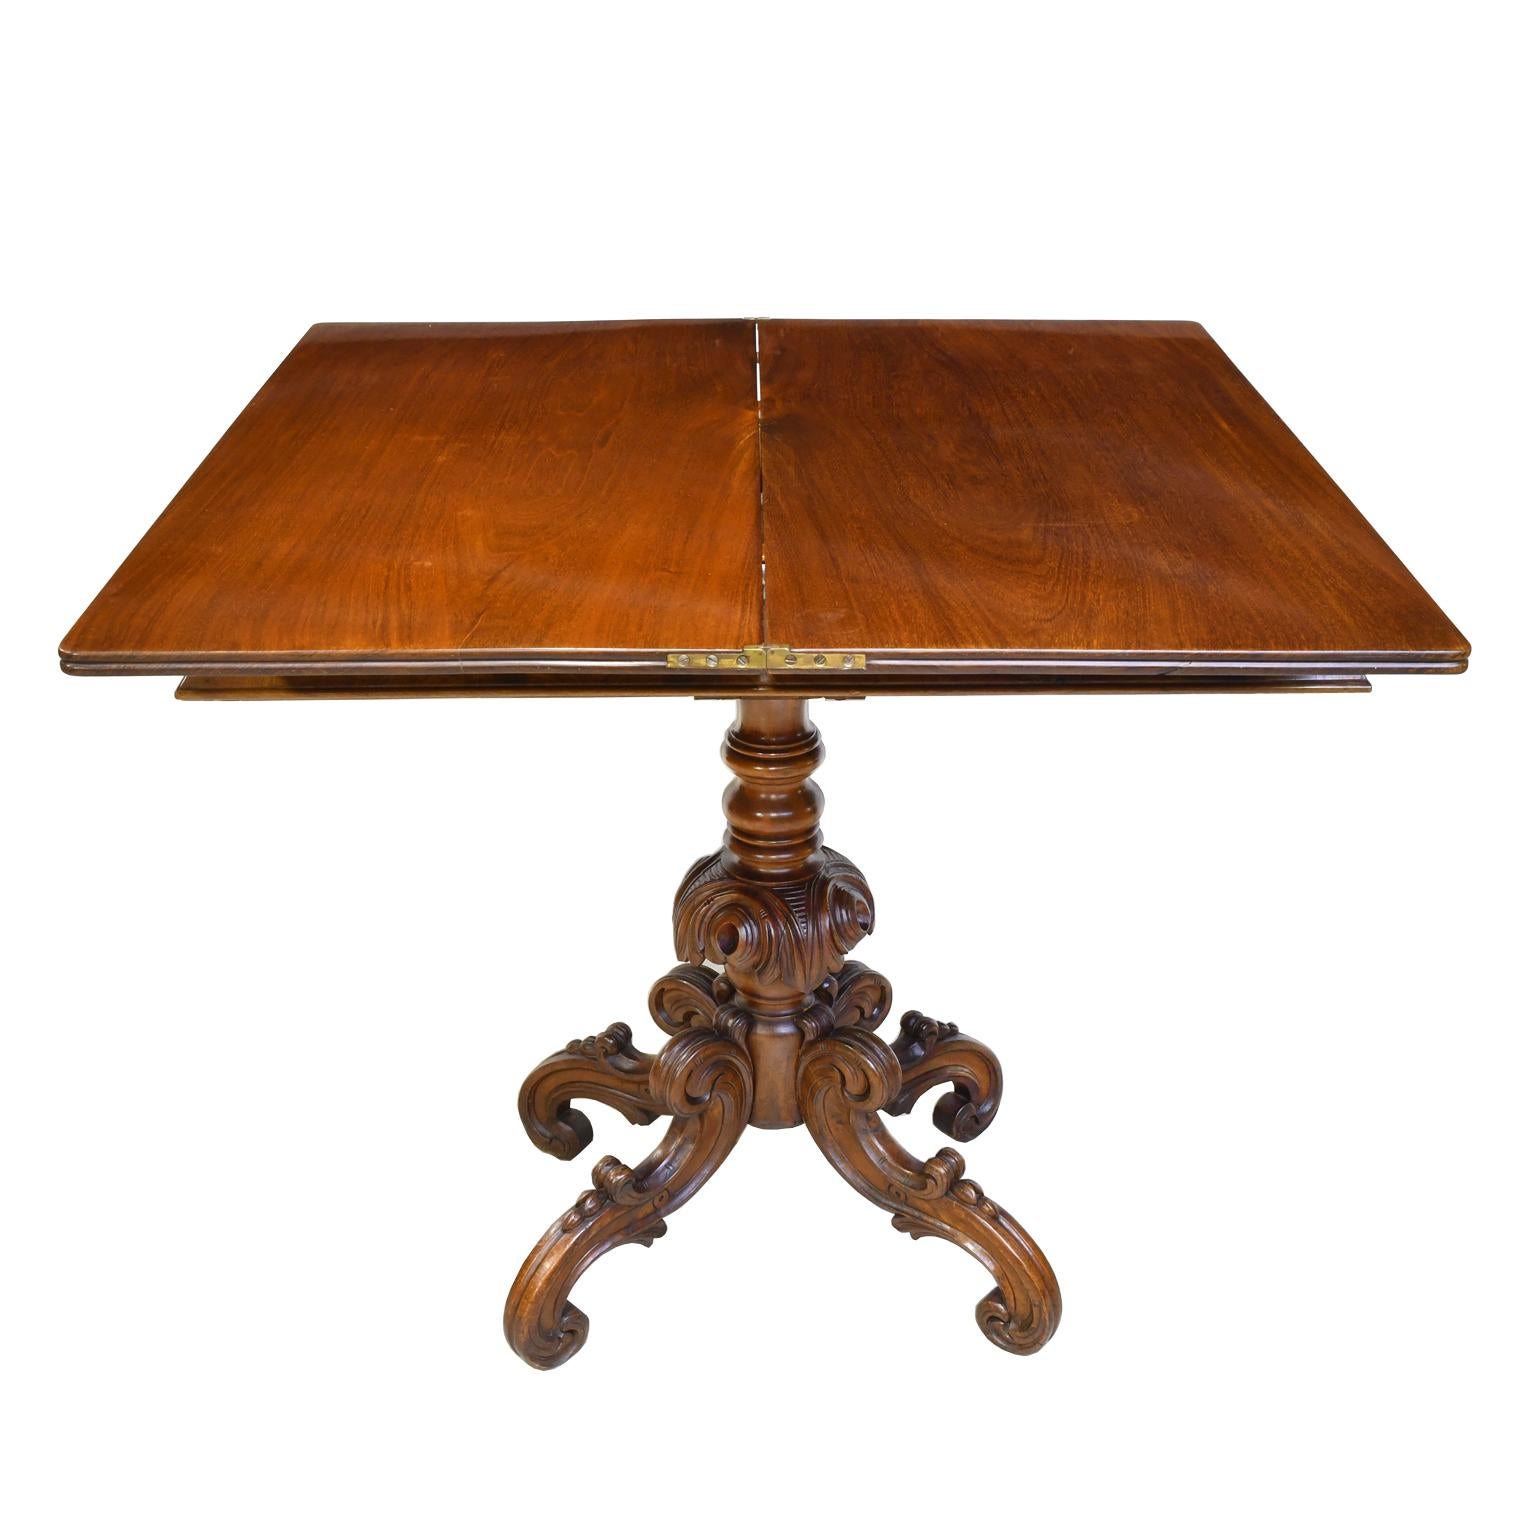 Turned Rococo-Revival Scandinavian Game Table, circa 1850 For Sale